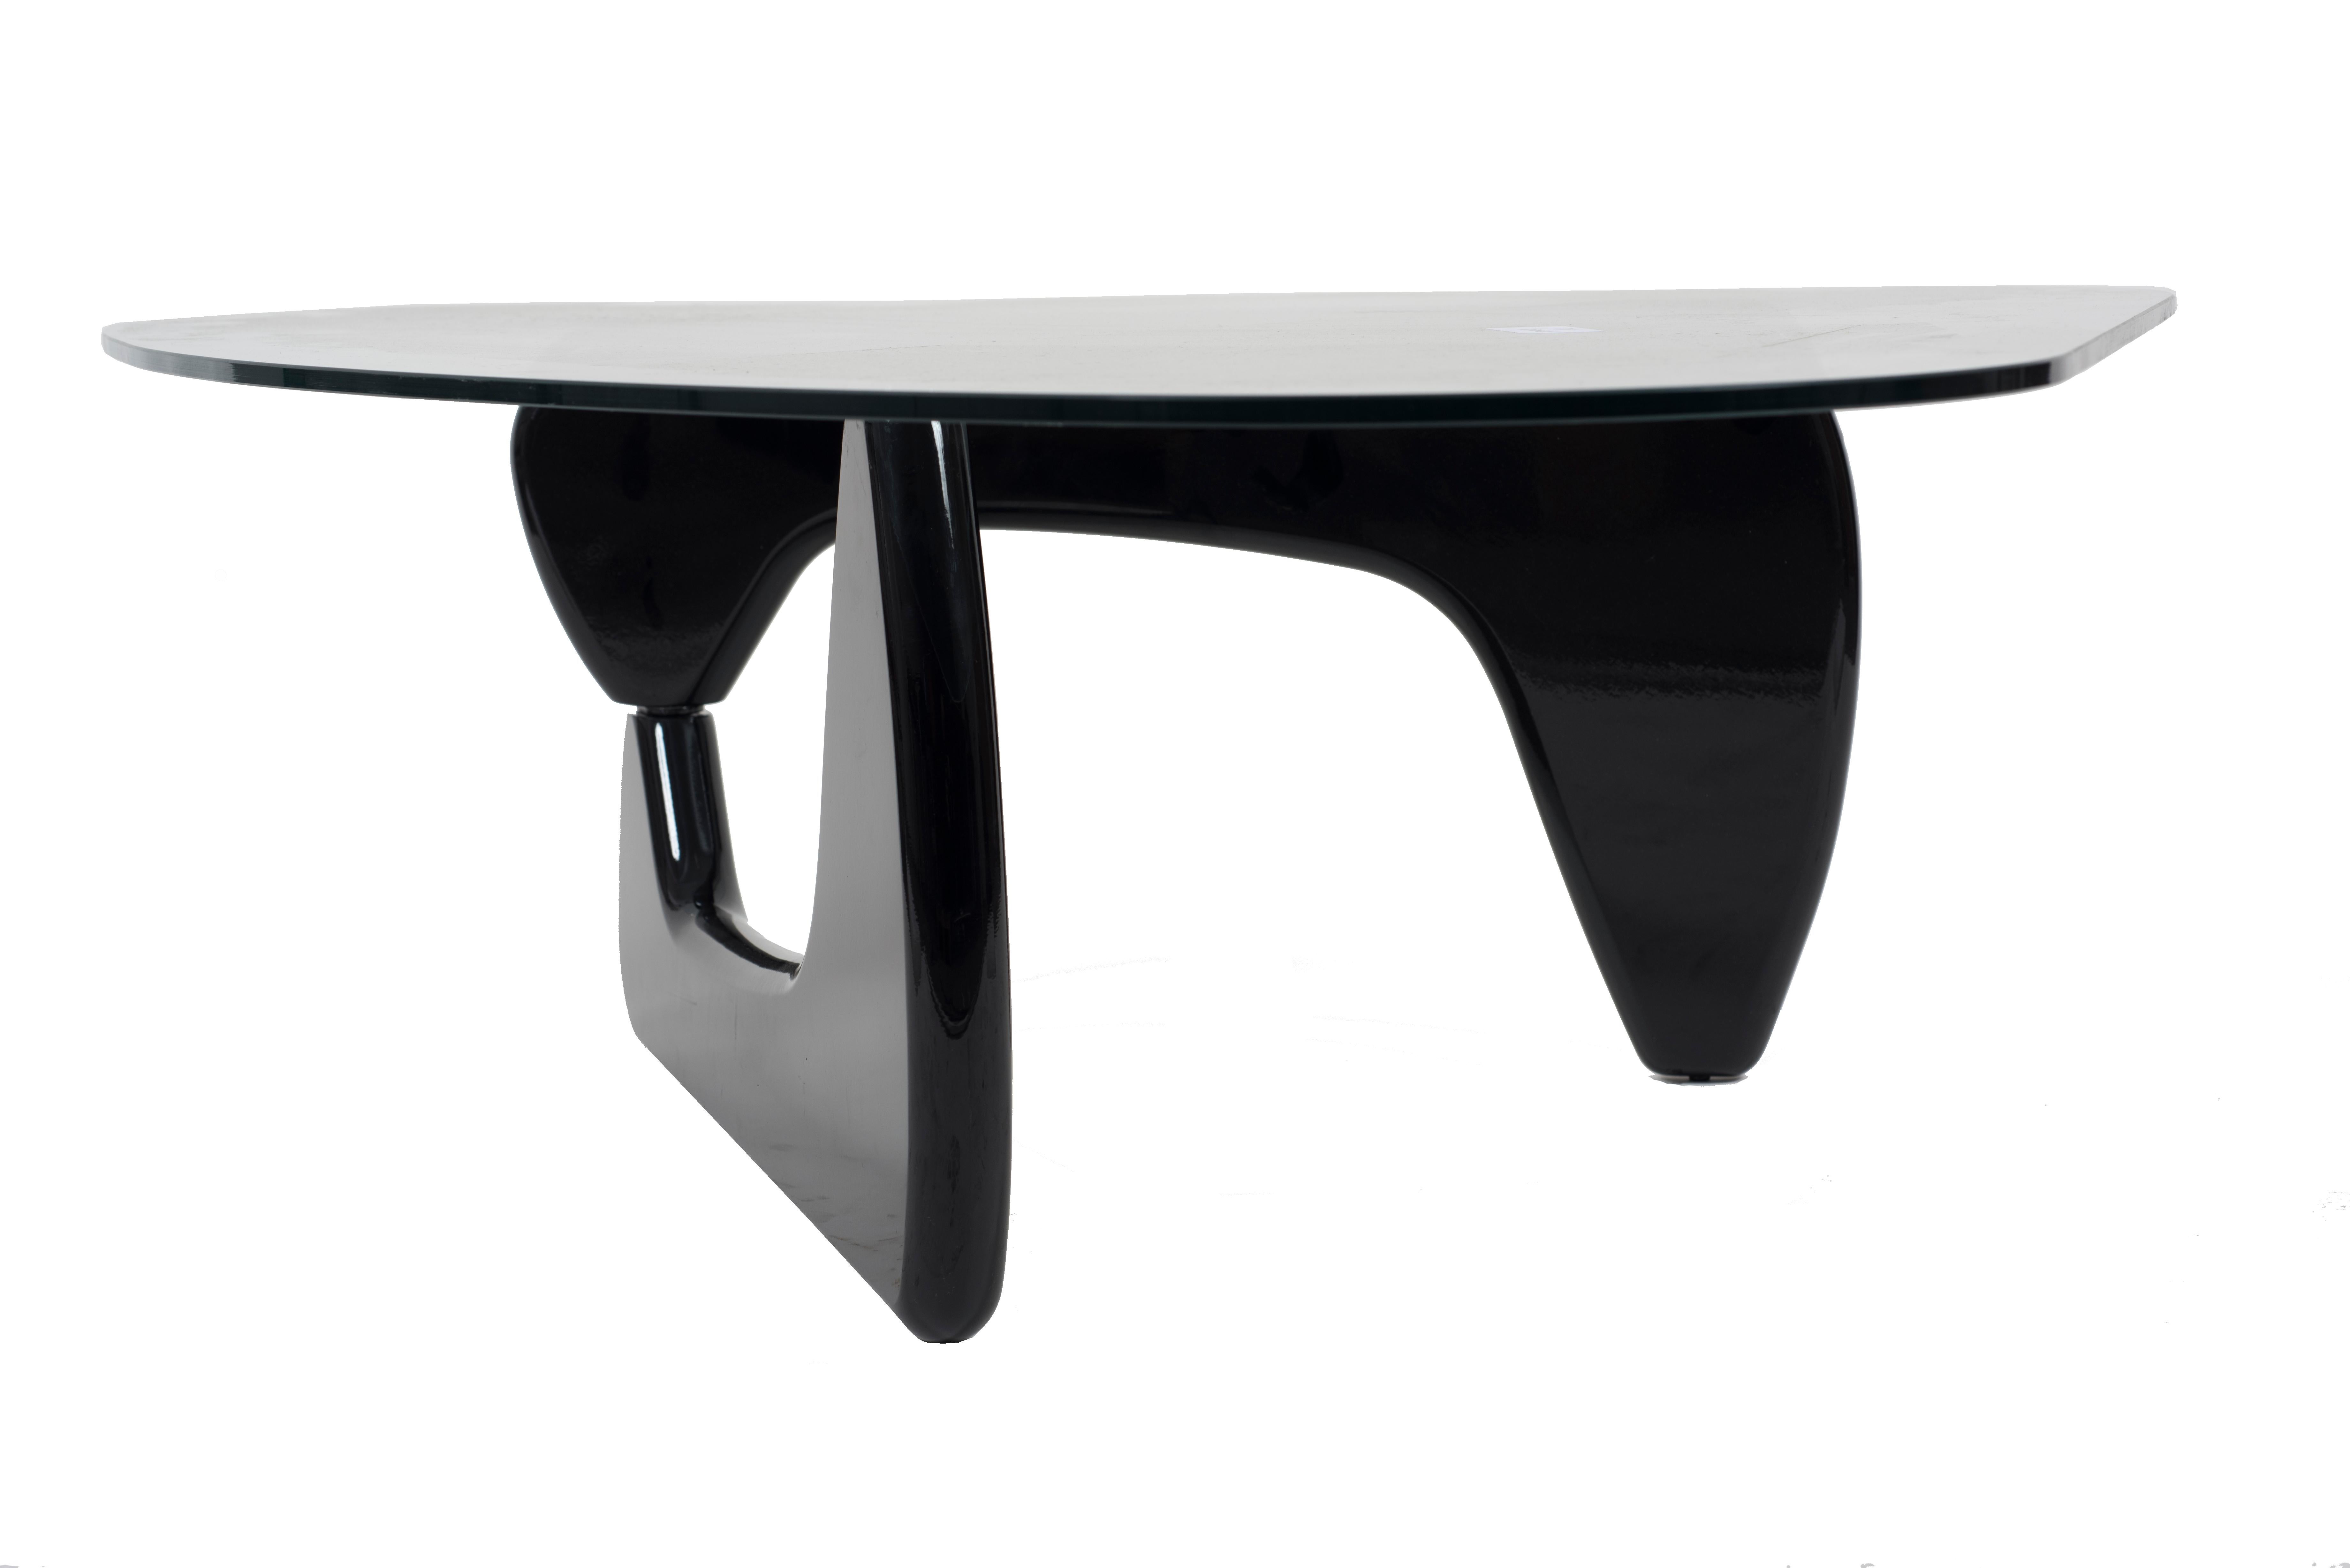 Vintage coffee table in lacquered wood and cut crystal by Isamu Noguchi.
Excellent conditions.